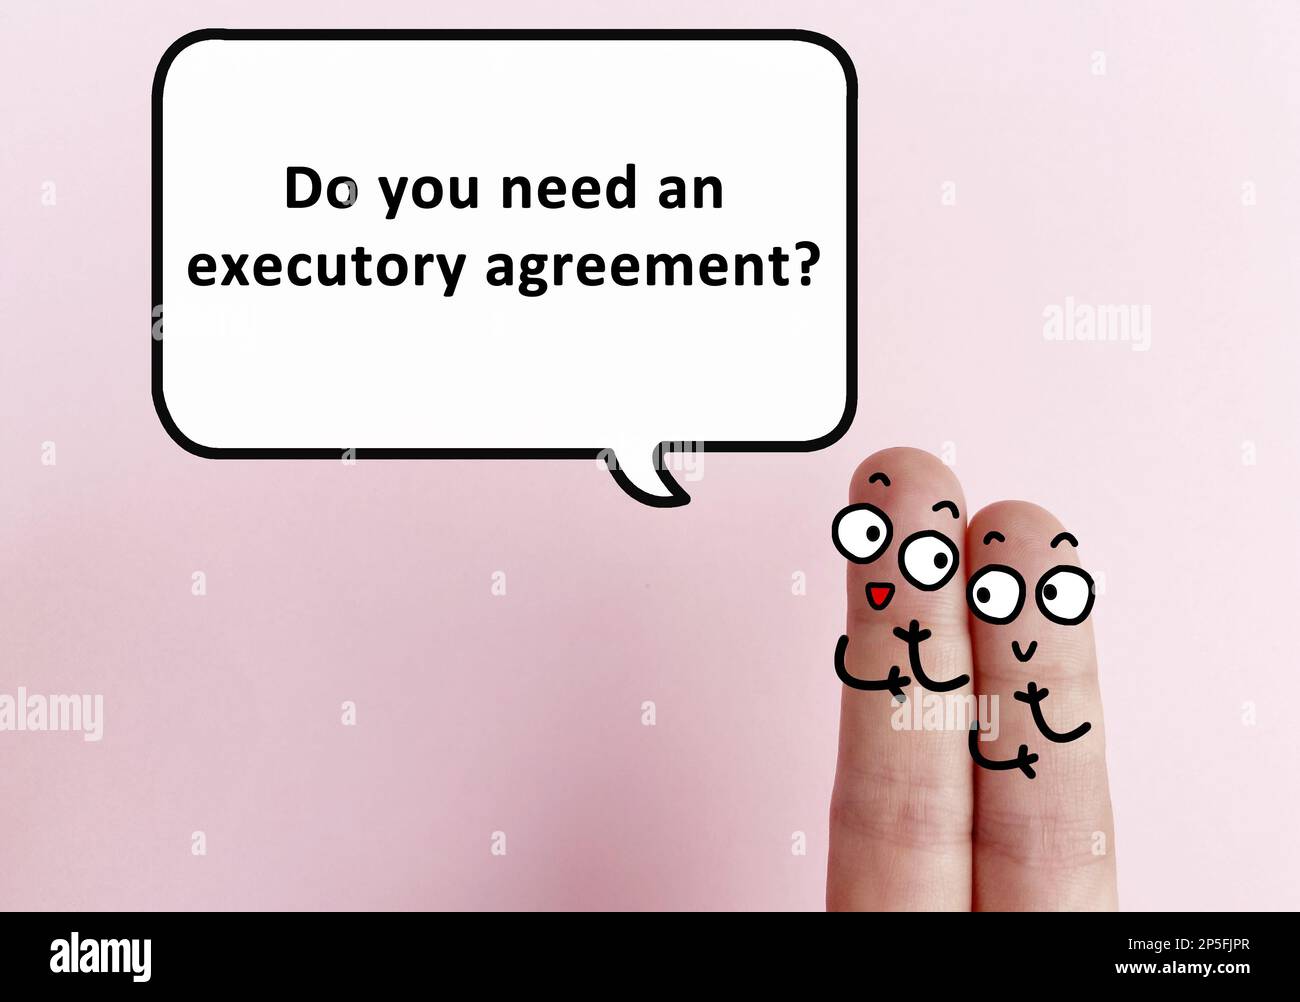 Two fingers are decorated as two person. They are discussing about agreement. One of them is asking another if he needs executory agreement. Stock Photo